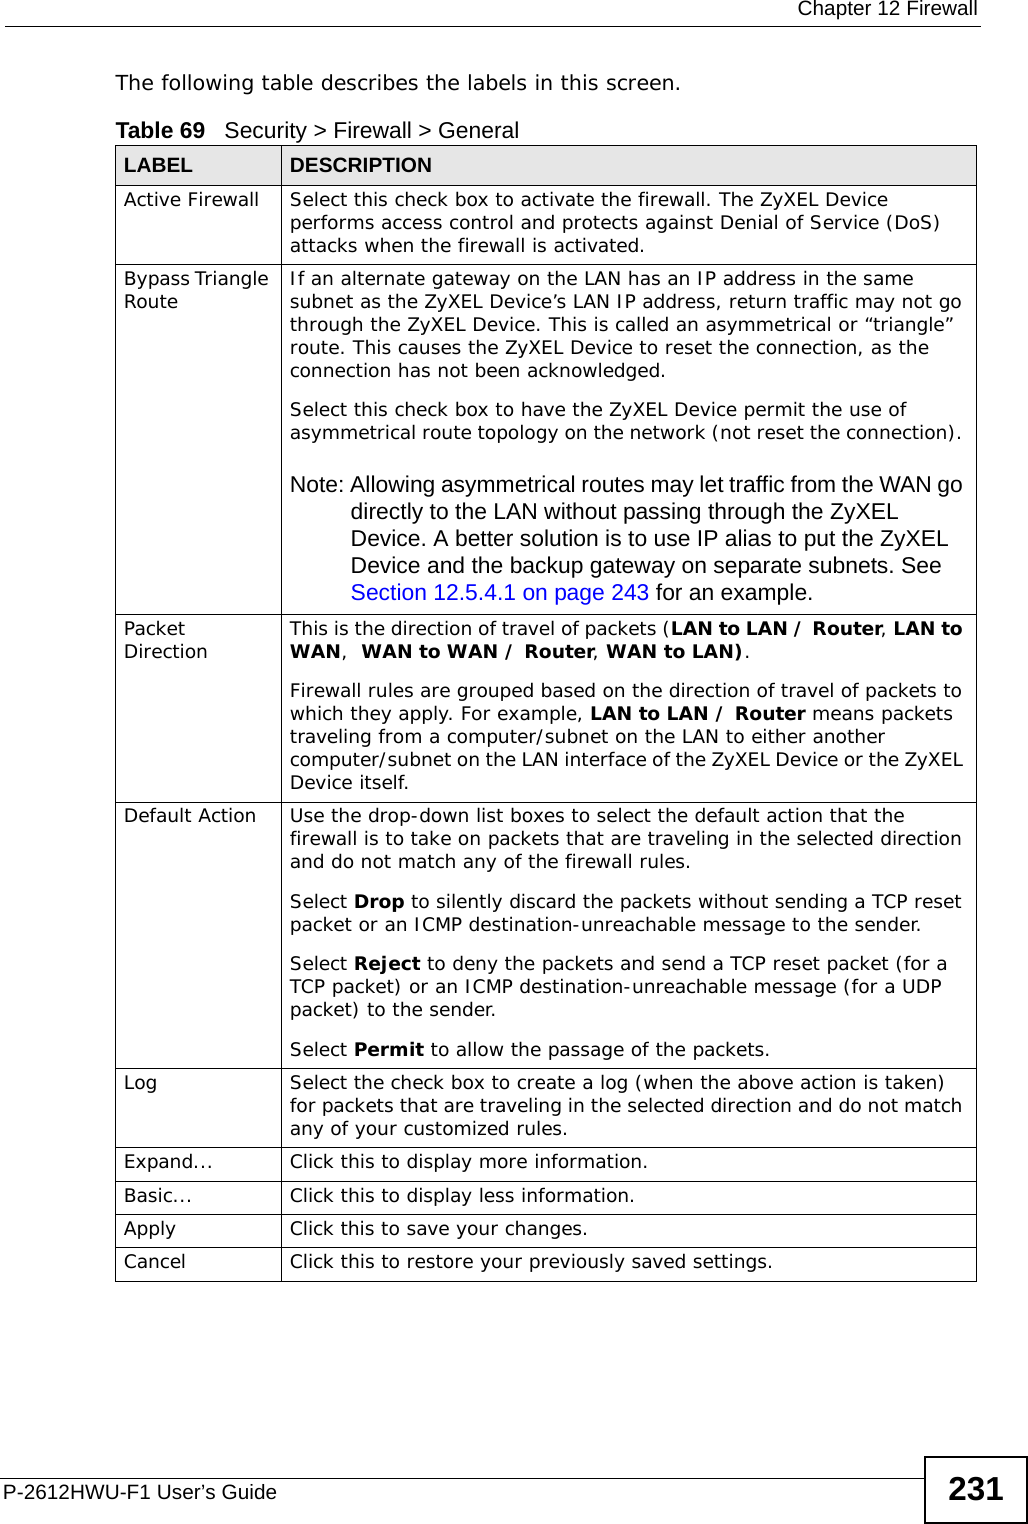  Chapter 12 FirewallP-2612HWU-F1 User’s Guide 231The following table describes the labels in this screen. Table 69   Security &gt; Firewall &gt; GeneralLABEL DESCRIPTIONActive Firewall Select this check box to activate the firewall. The ZyXEL Device performs access control and protects against Denial of Service (DoS) attacks when the firewall is activated.Bypass Triangle Route If an alternate gateway on the LAN has an IP address in the same subnet as the ZyXEL Device’s LAN IP address, return traffic may not go through the ZyXEL Device. This is called an asymmetrical or “triangle” route. This causes the ZyXEL Device to reset the connection, as the connection has not been acknowledged.Select this check box to have the ZyXEL Device permit the use of asymmetrical route topology on the network (not reset the connection). Note: Allowing asymmetrical routes may let traffic from the WAN go directly to the LAN without passing through the ZyXEL Device. A better solution is to use IP alias to put the ZyXEL Device and the backup gateway on separate subnets. See Section 12.5.4.1 on page 243 for an example. Packet Direction This is the direction of travel of packets (LAN to LAN / Router, LAN to WAN,  WAN to WAN / Router, WAN to LAN).Firewall rules are grouped based on the direction of travel of packets to which they apply. For example, LAN to LAN / Router means packets traveling from a computer/subnet on the LAN to either another computer/subnet on the LAN interface of the ZyXEL Device or the ZyXEL Device itself. Default Action Use the drop-down list boxes to select the default action that the firewall is to take on packets that are traveling in the selected direction and do not match any of the firewall rules. Select Drop to silently discard the packets without sending a TCP reset packet or an ICMP destination-unreachable message to the sender.Select Reject to deny the packets and send a TCP reset packet (for a TCP packet) or an ICMP destination-unreachable message (for a UDP packet) to the sender.Select Permit to allow the passage of the packets.Log Select the check box to create a log (when the above action is taken) for packets that are traveling in the selected direction and do not match any of your customized rules.Expand... Click this to display more information.Basic... Click this to display less information.Apply Click this to save your changes.Cancel Click this to restore your previously saved settings.